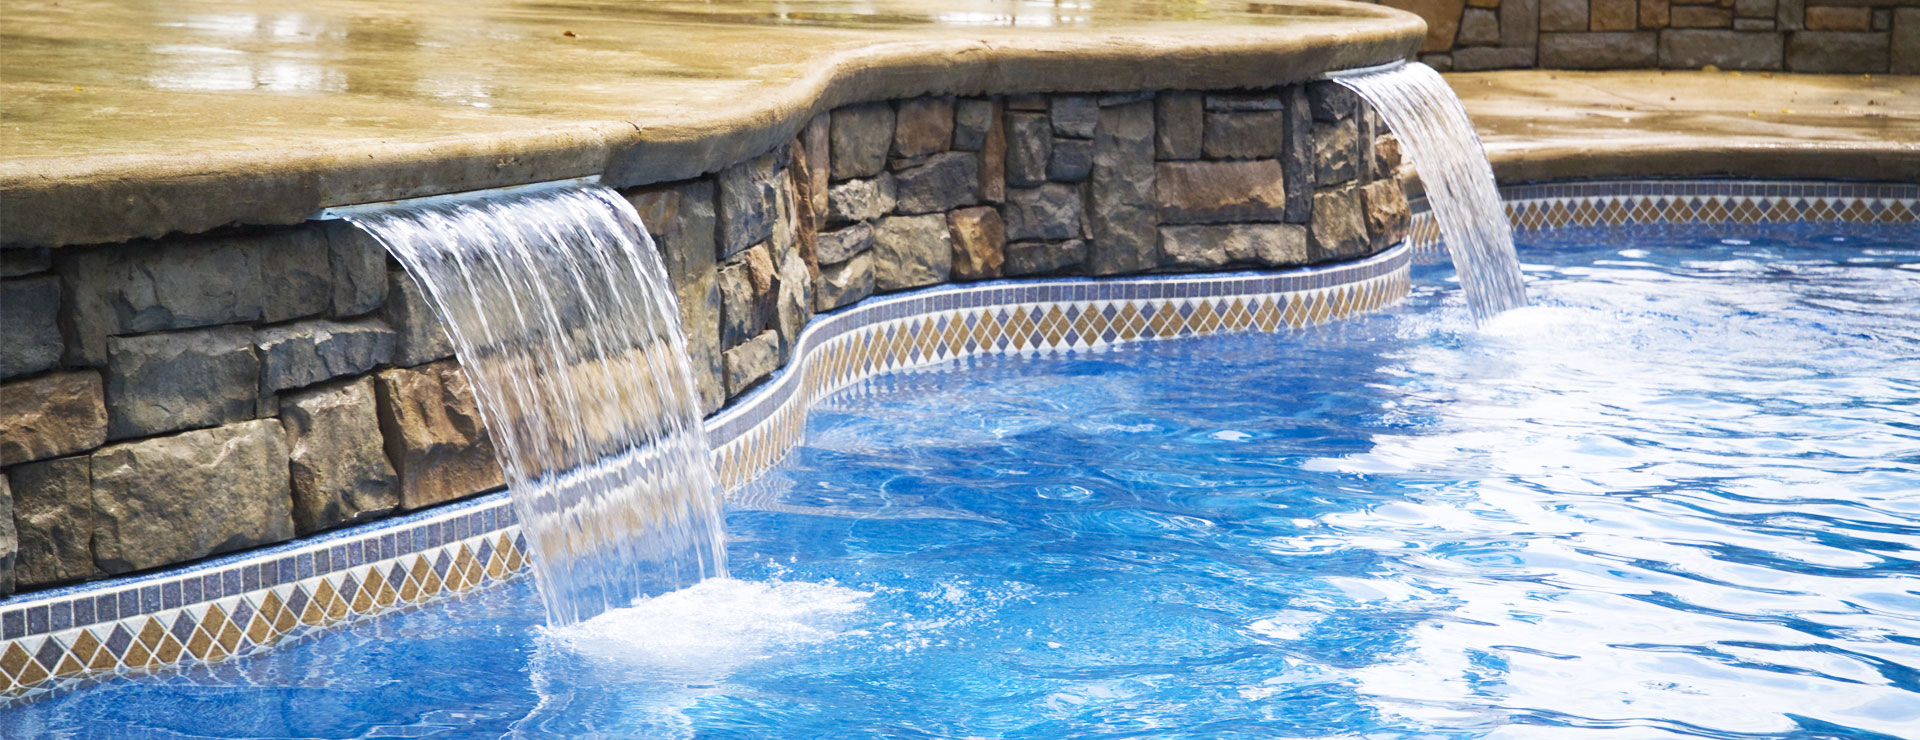 Paradise Pools - Pool Installation, Service and Supplies since 1963